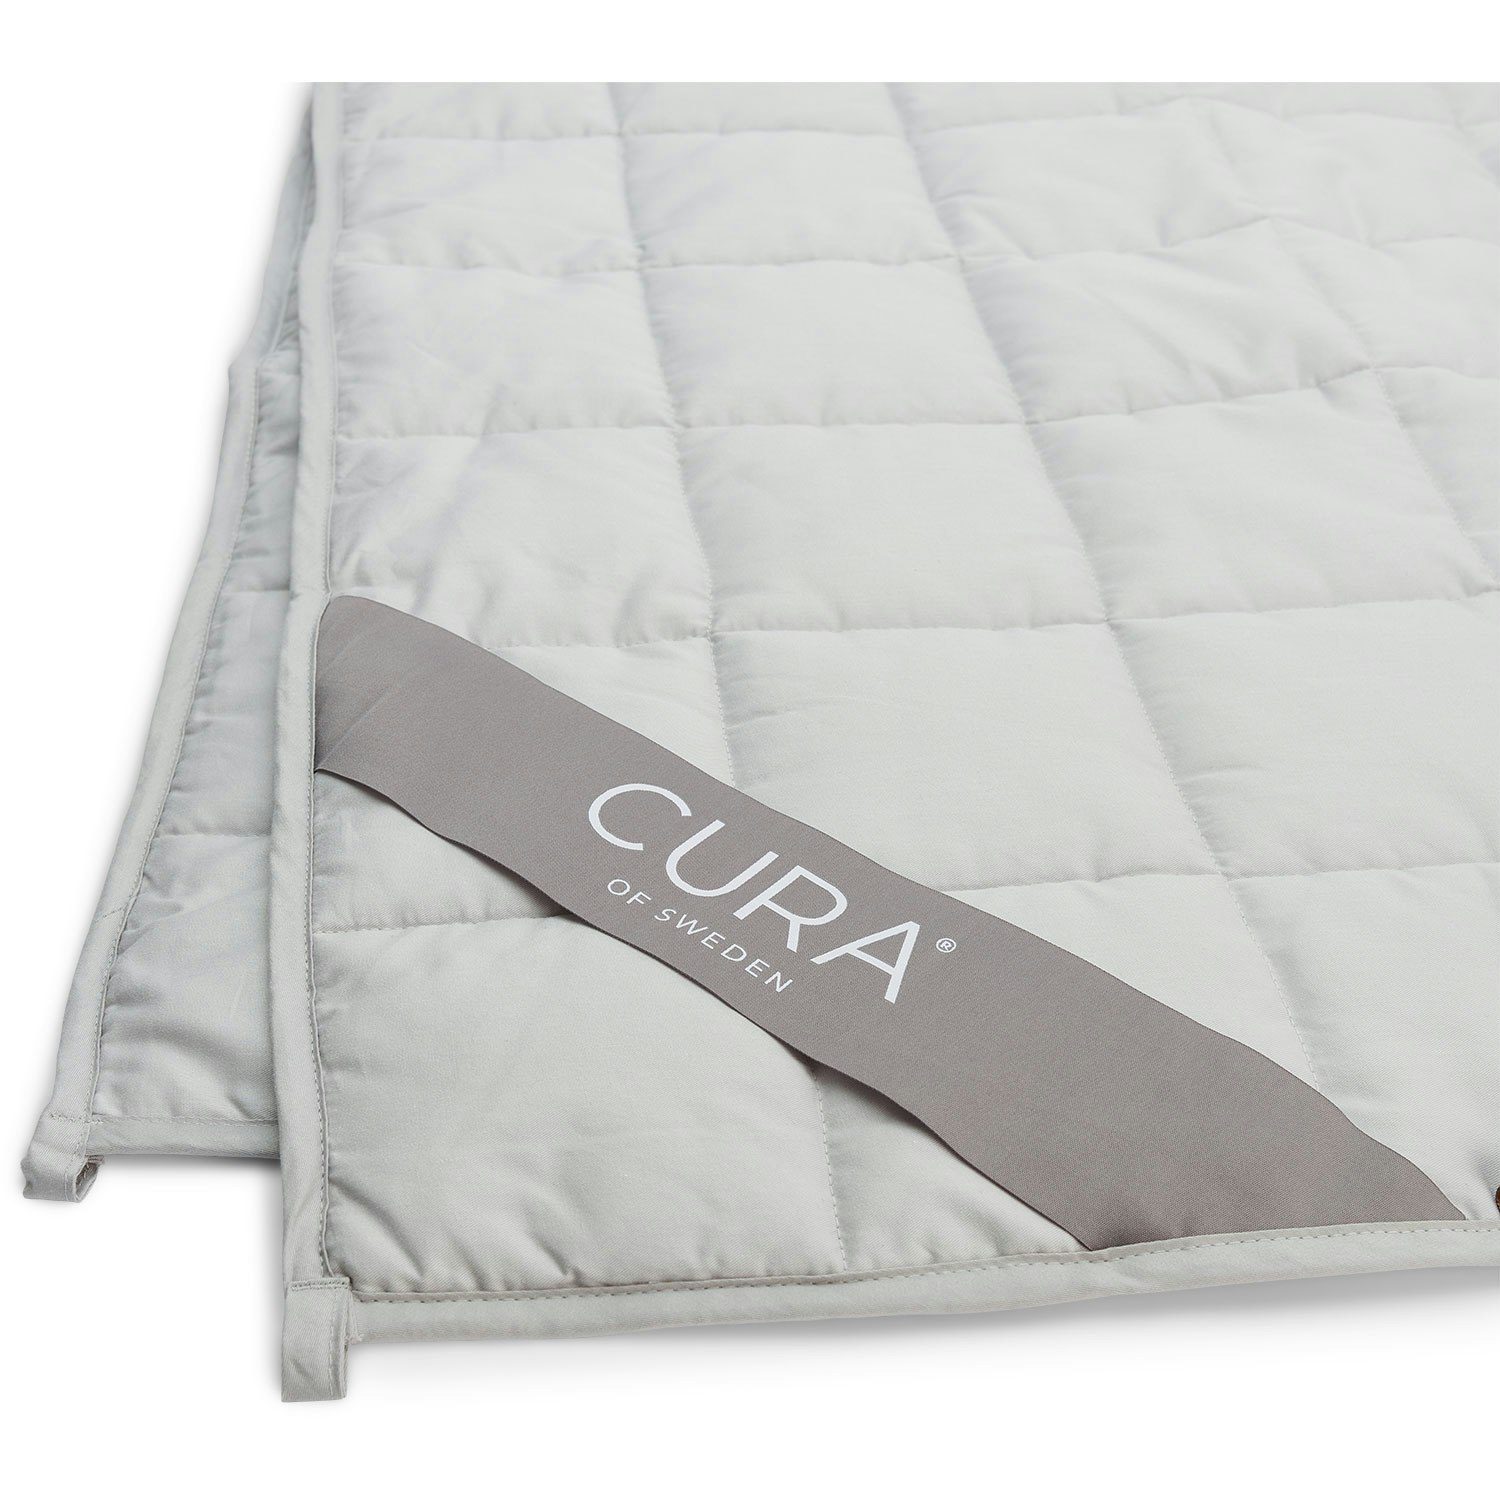 Pearl Classic 7 kg Weighted Blanket 150x200 cm, Light Grey - Cura of Sweden  @ RoyalDesign